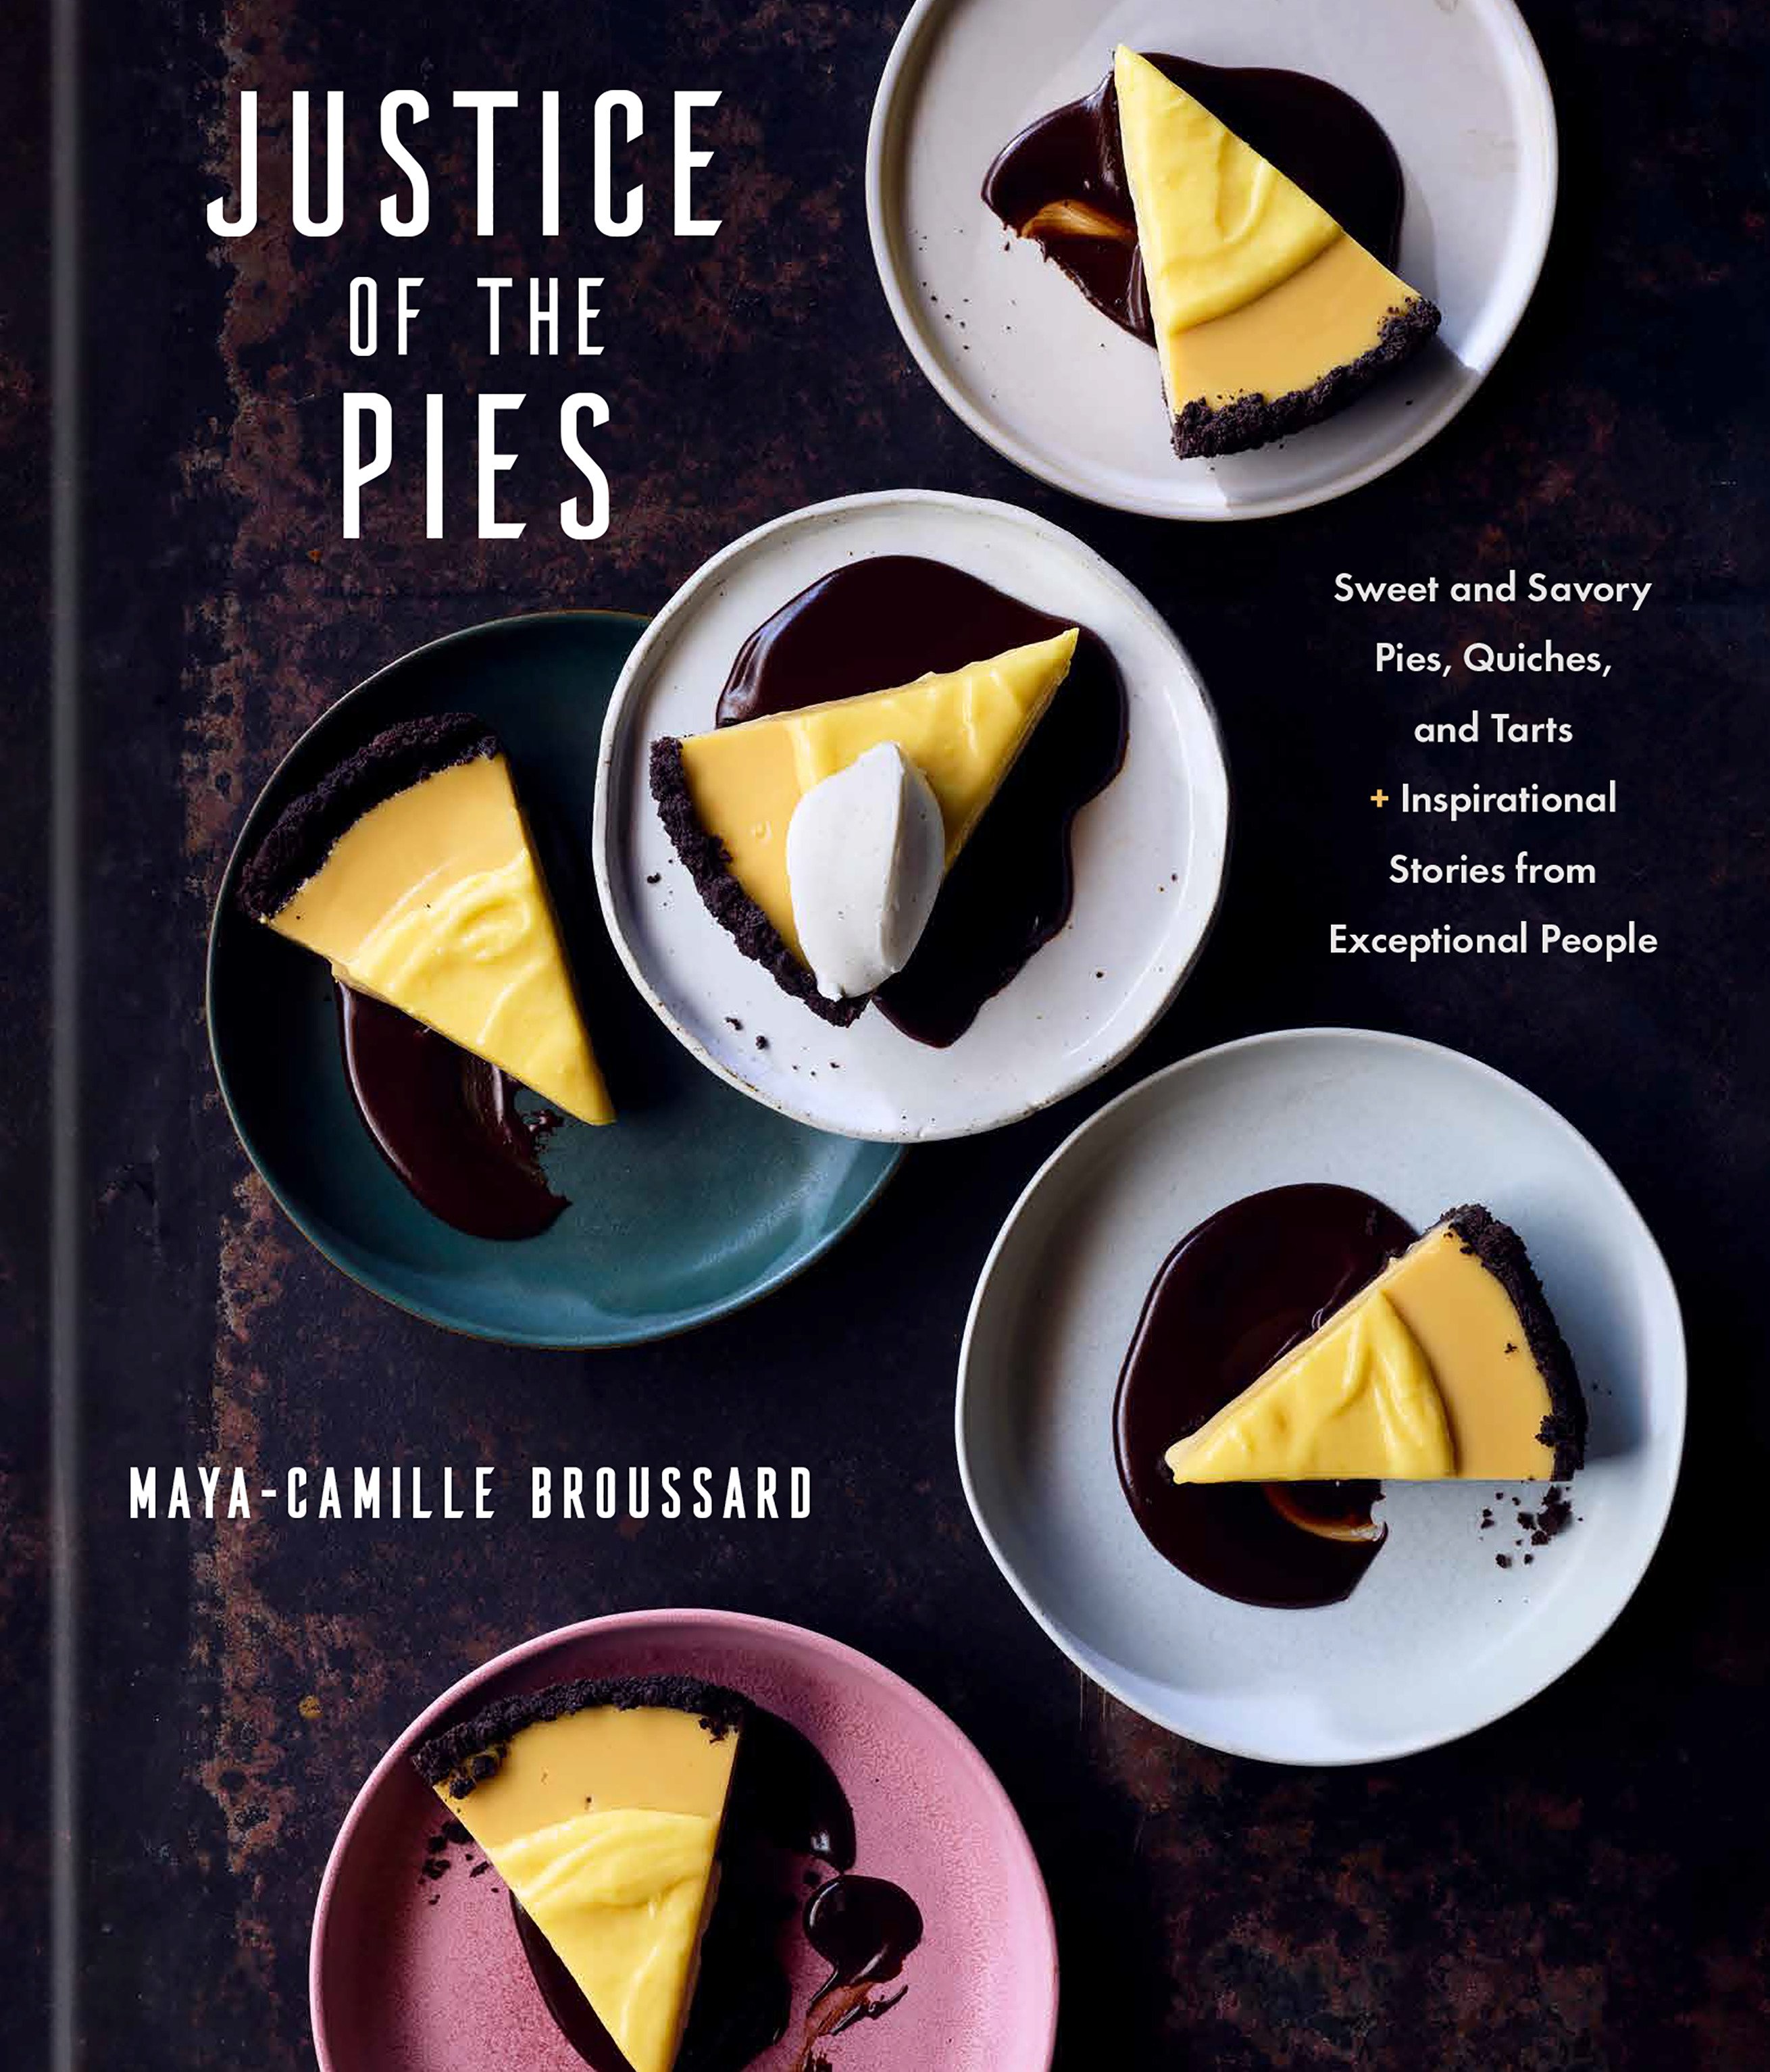 Justice of the Pies Sweet and Savory Pies, Quiches, and Tarts plus Inspirational Stories from Exceptional People: A Baking Book cover image